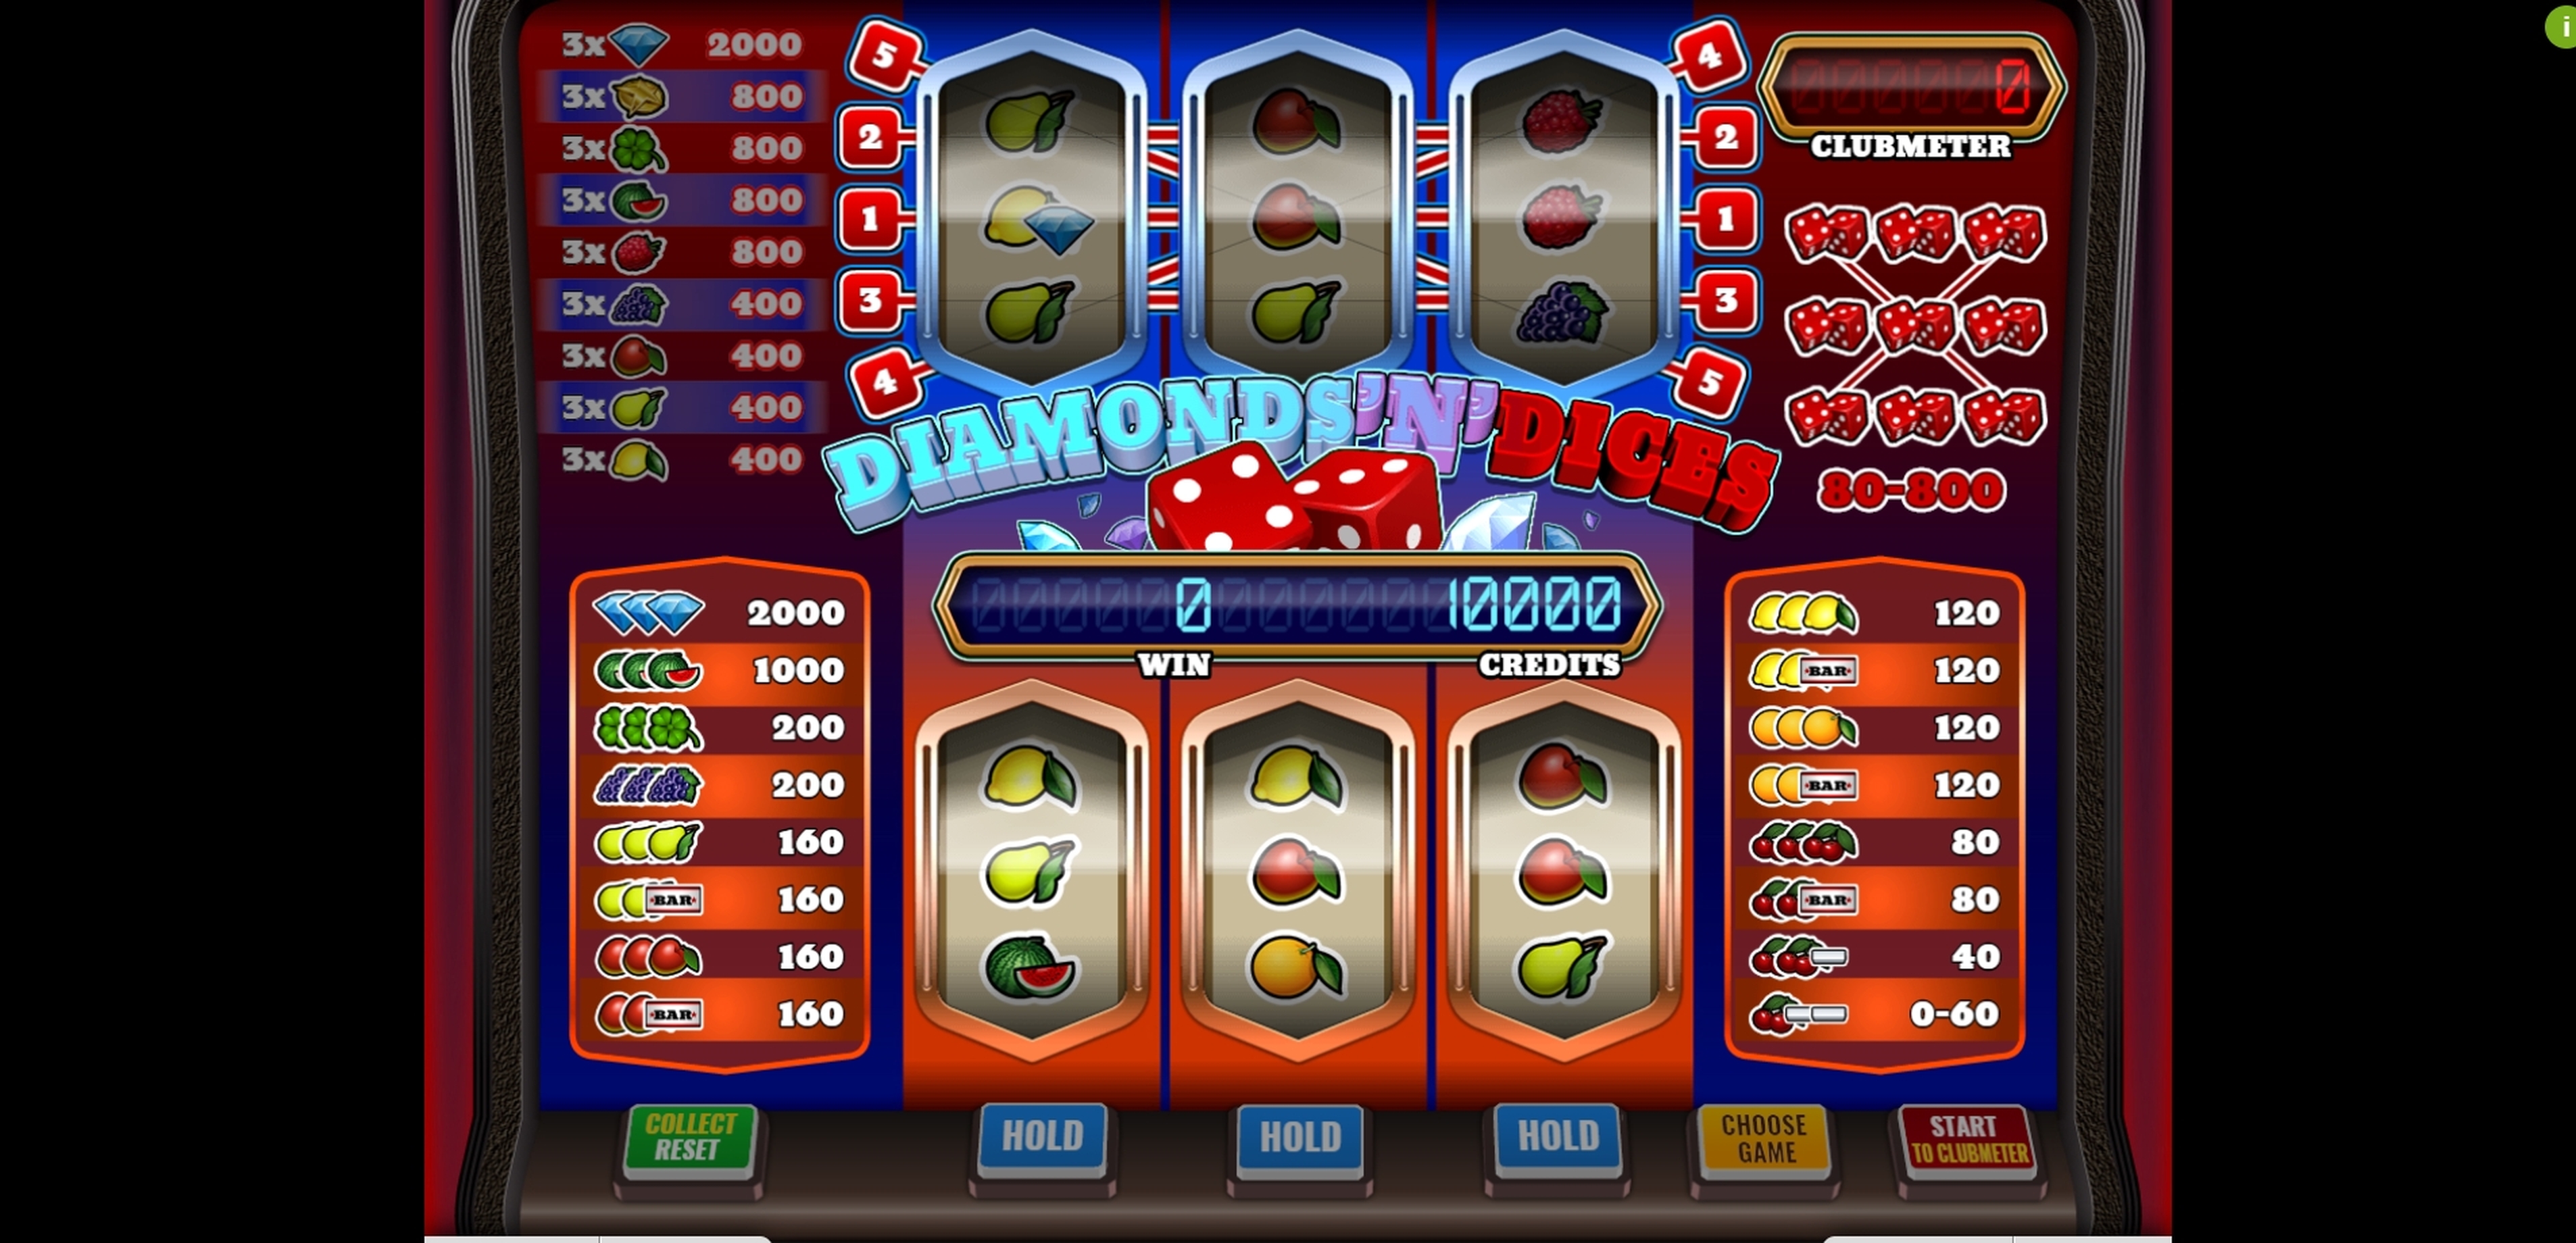 Reels in Diamonds 'N' Dices Slot Game by Imagina